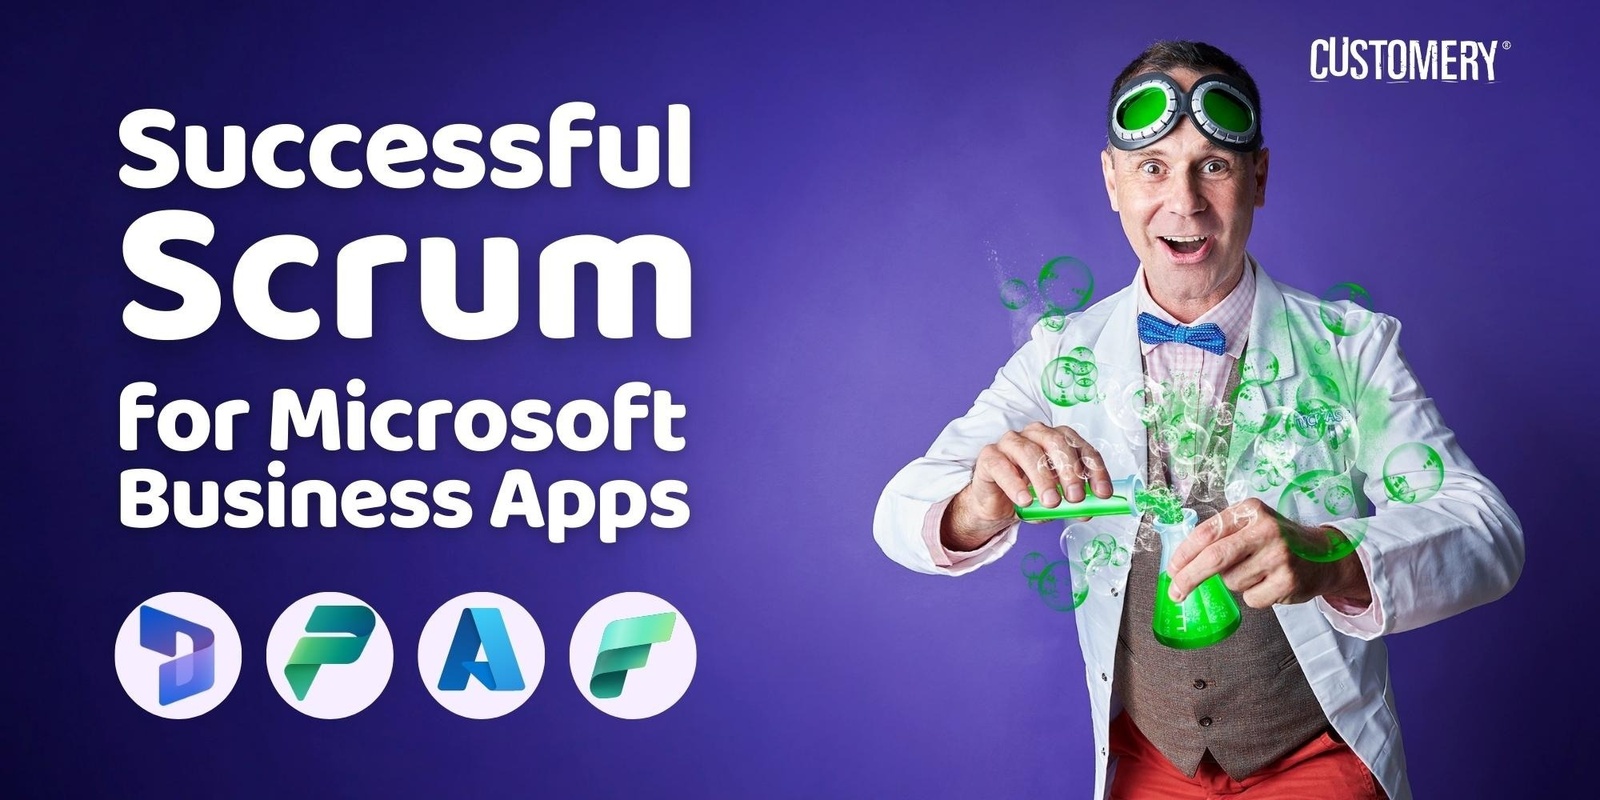 Banner image for Successful Scrum for Microsoft Business Apps